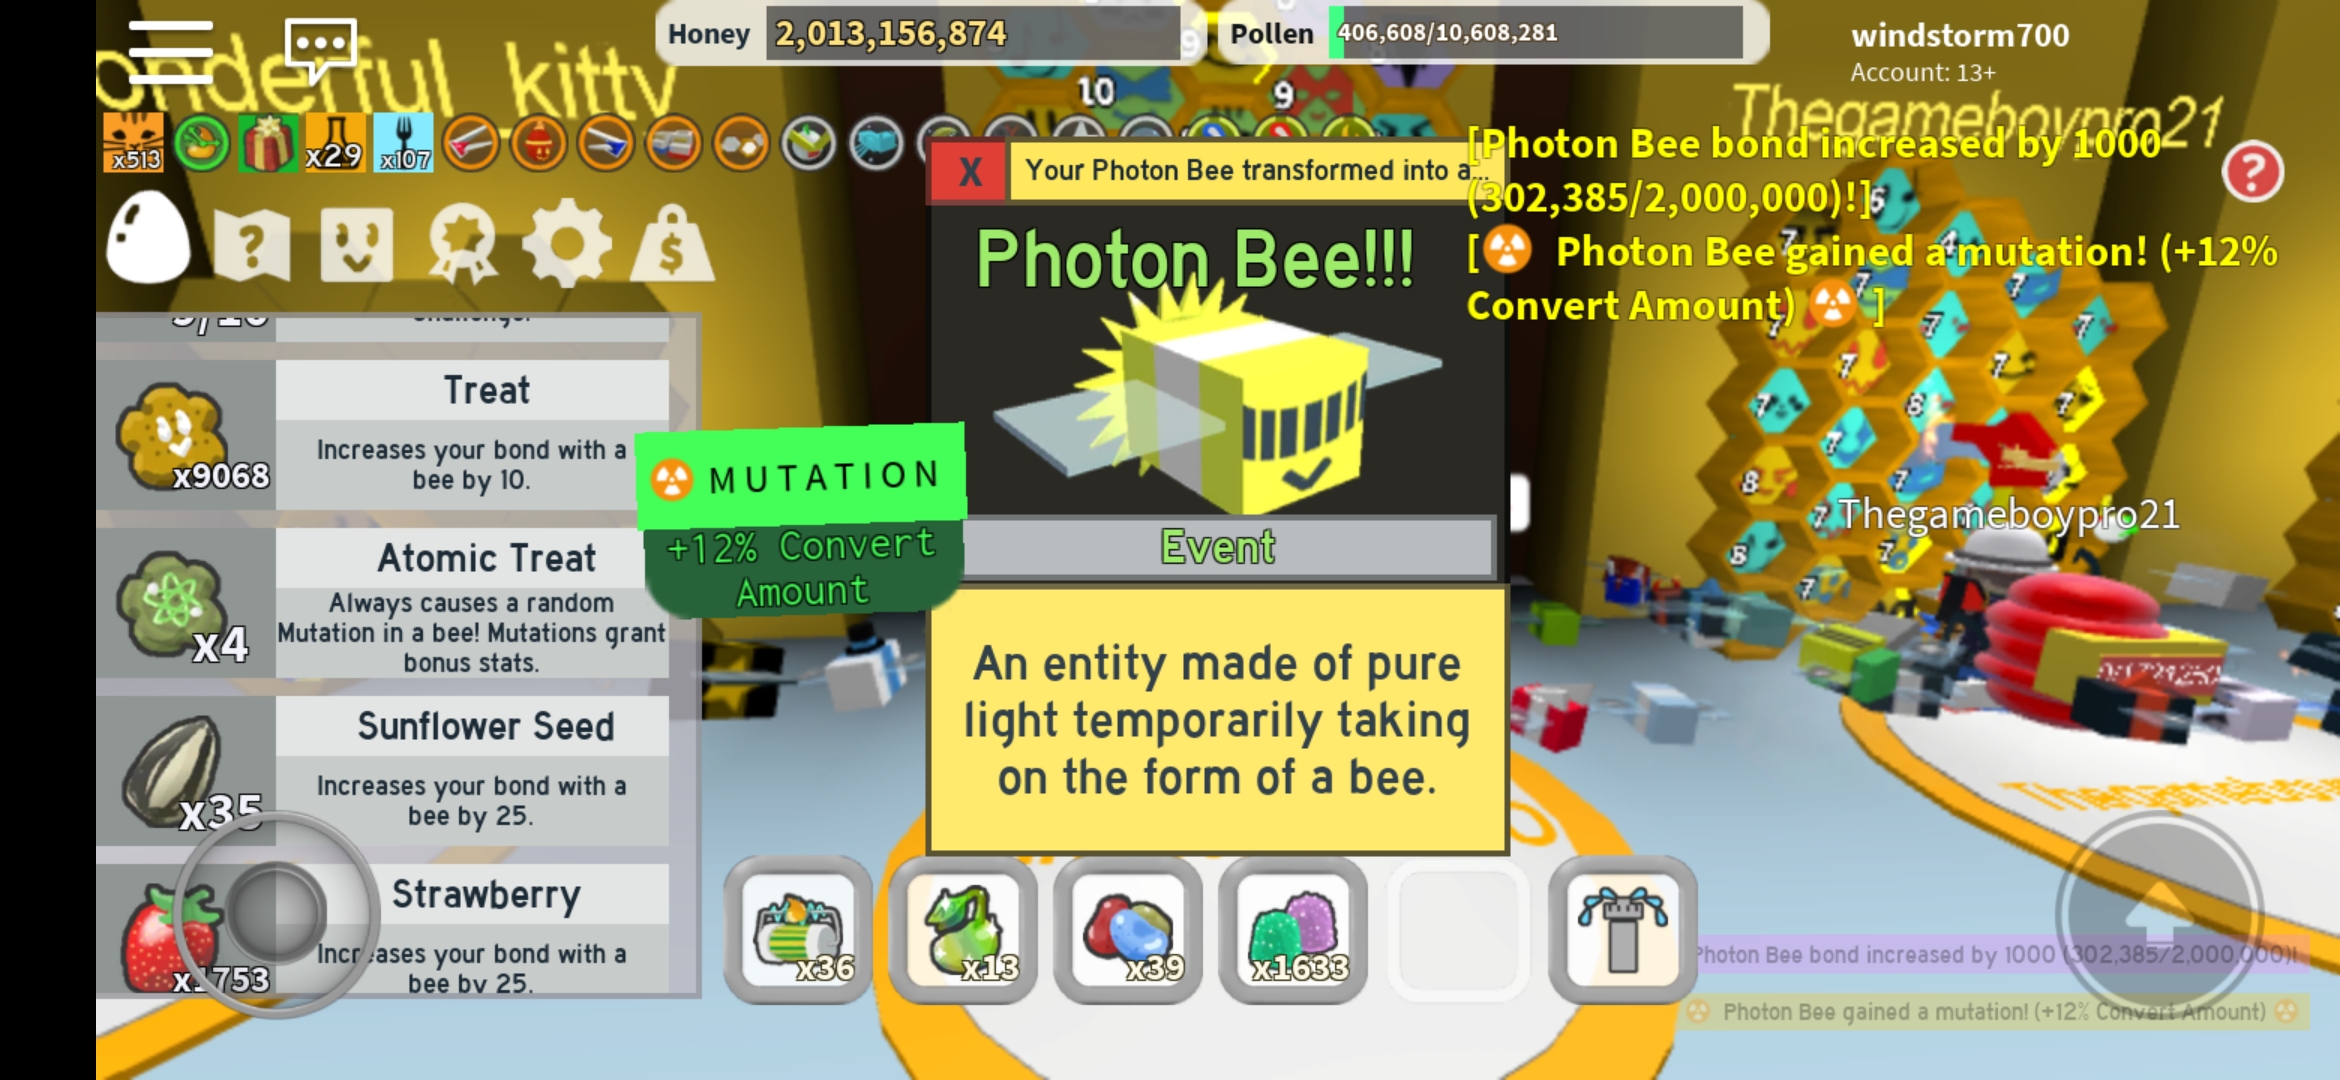 Move Along If You Find My Progress Reports Annoying Fandom - new sun bear photon bee ticket locations roblox bee